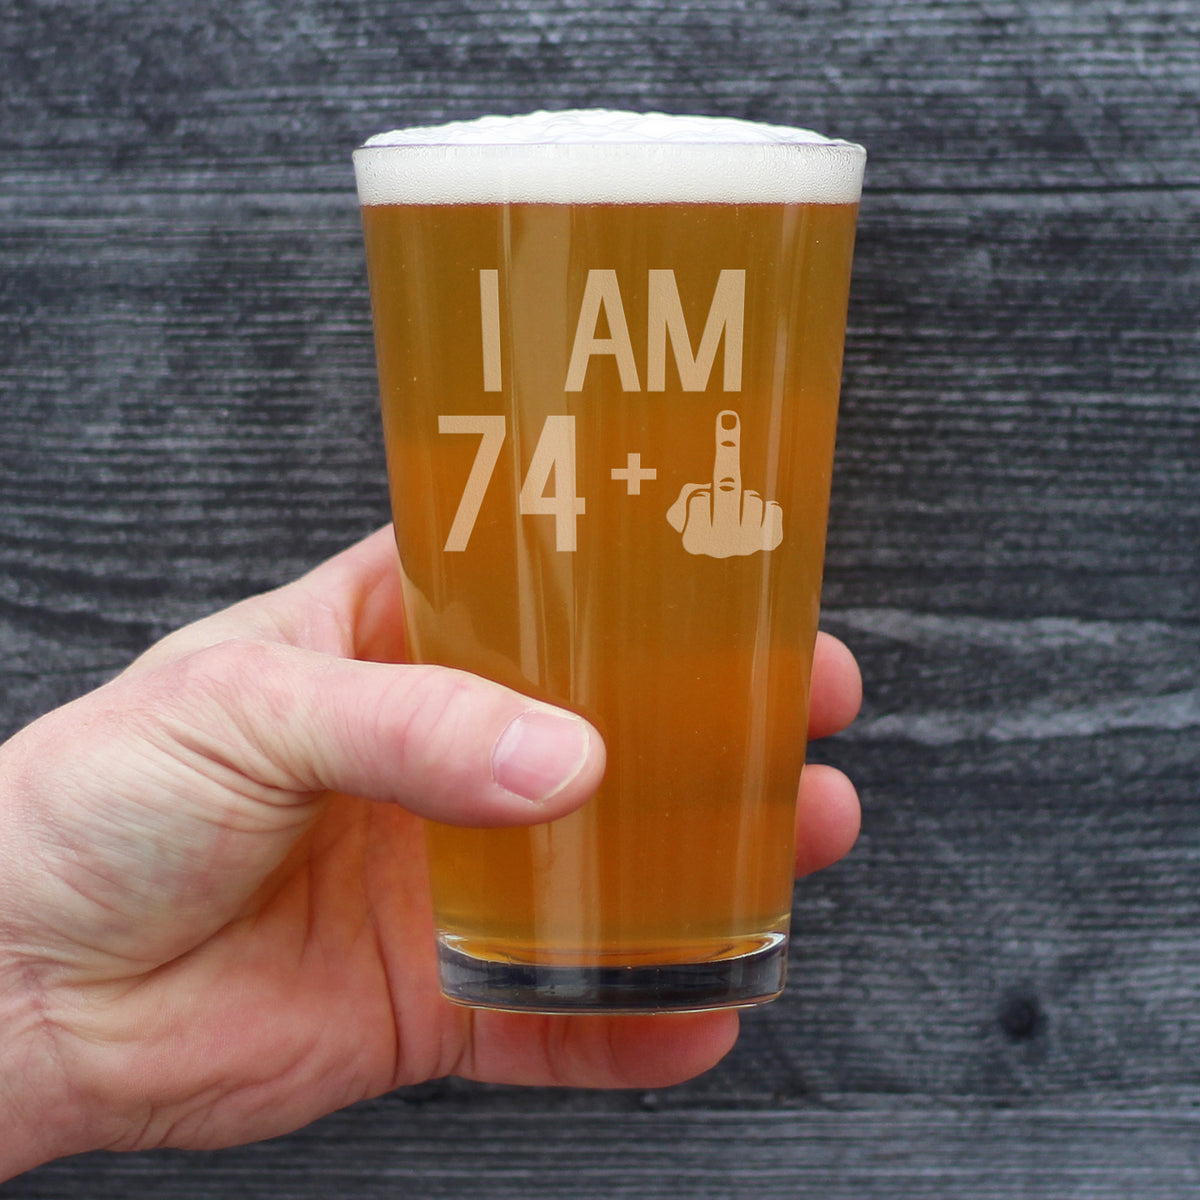 I Am 74 + 1 Middle Finger Funny Pint Glass for Beer Lovers, Etched Sayings, 75th Birthday Gift for Men and Women